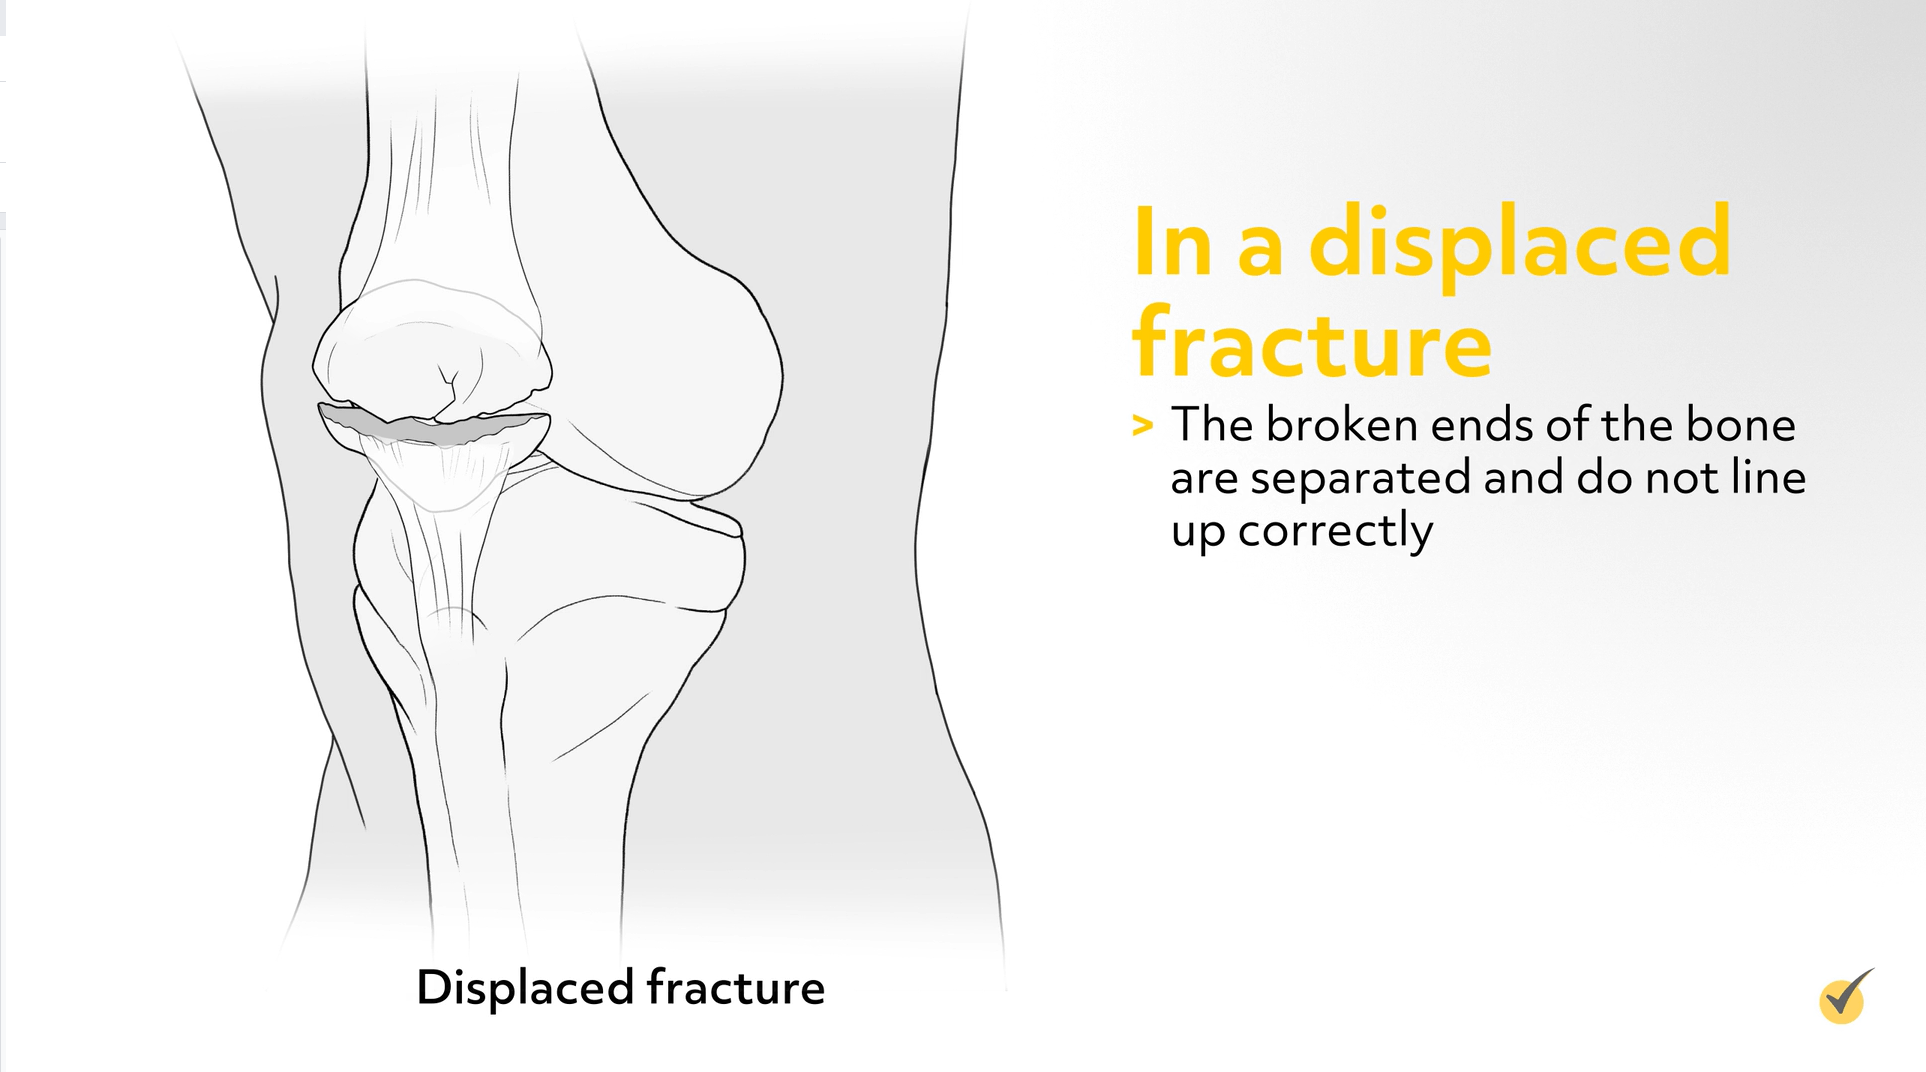 Image of a displaced fracture; this is when the broken ends of the bone are separated, and are not aligned.